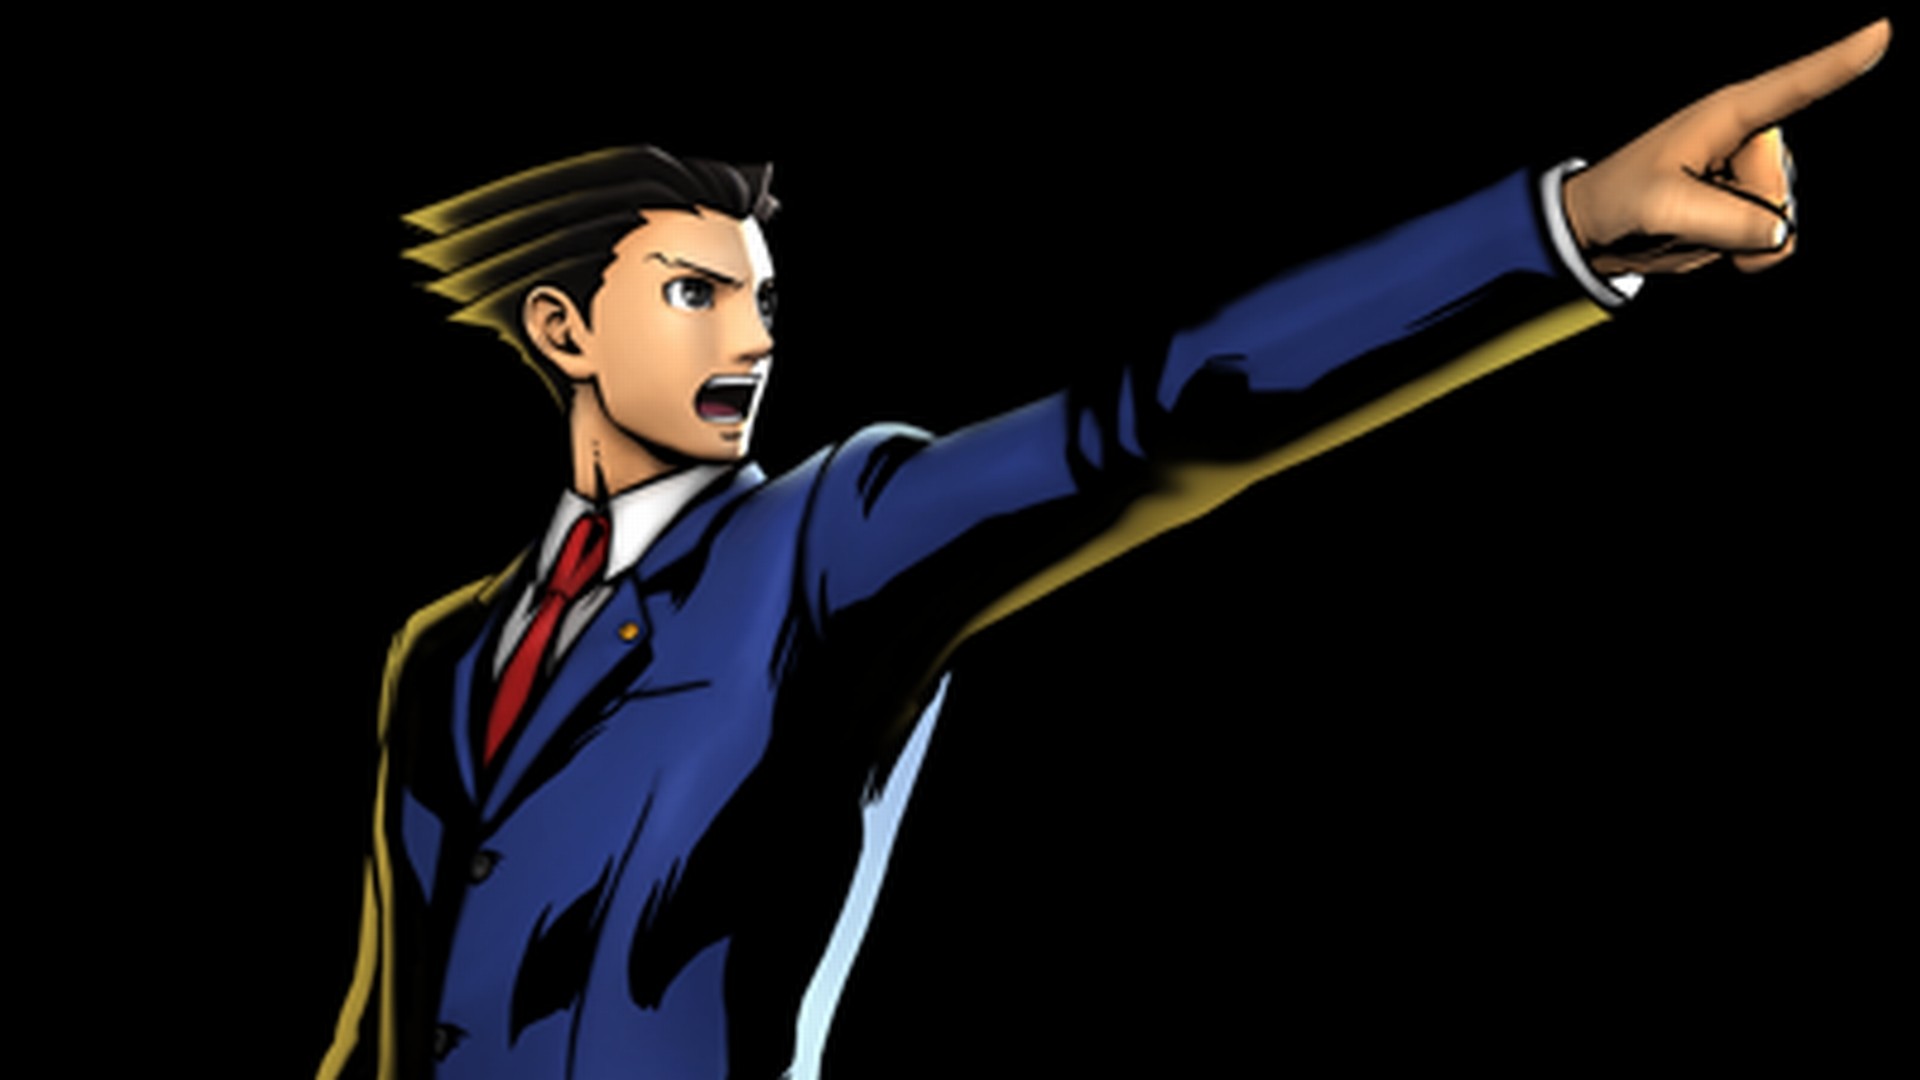 1920x1080 Video Game - Phoenix Wright: Ace Attorney Wallpaper